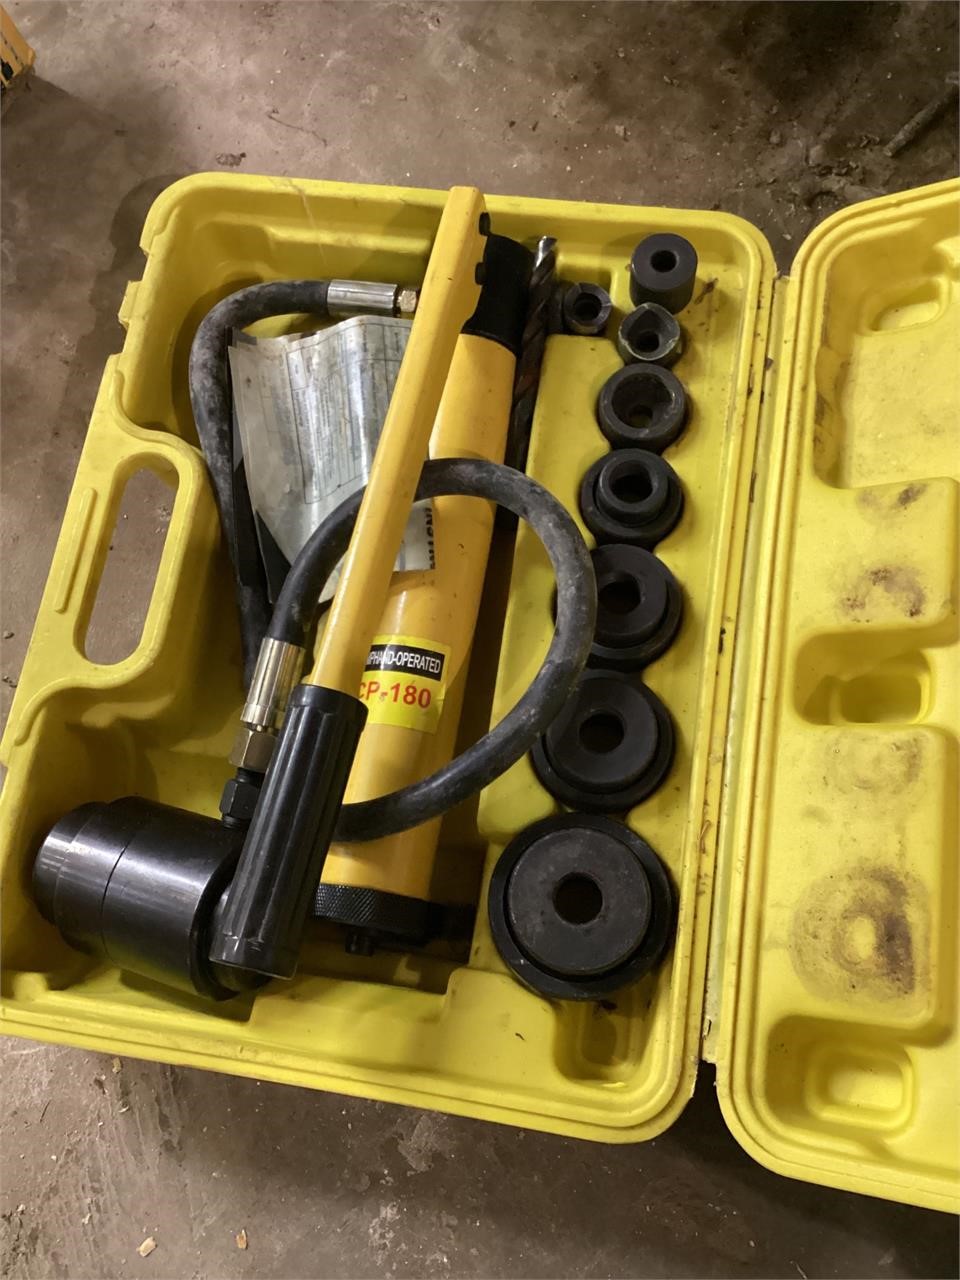 Online Rocky Point Tools, part 2